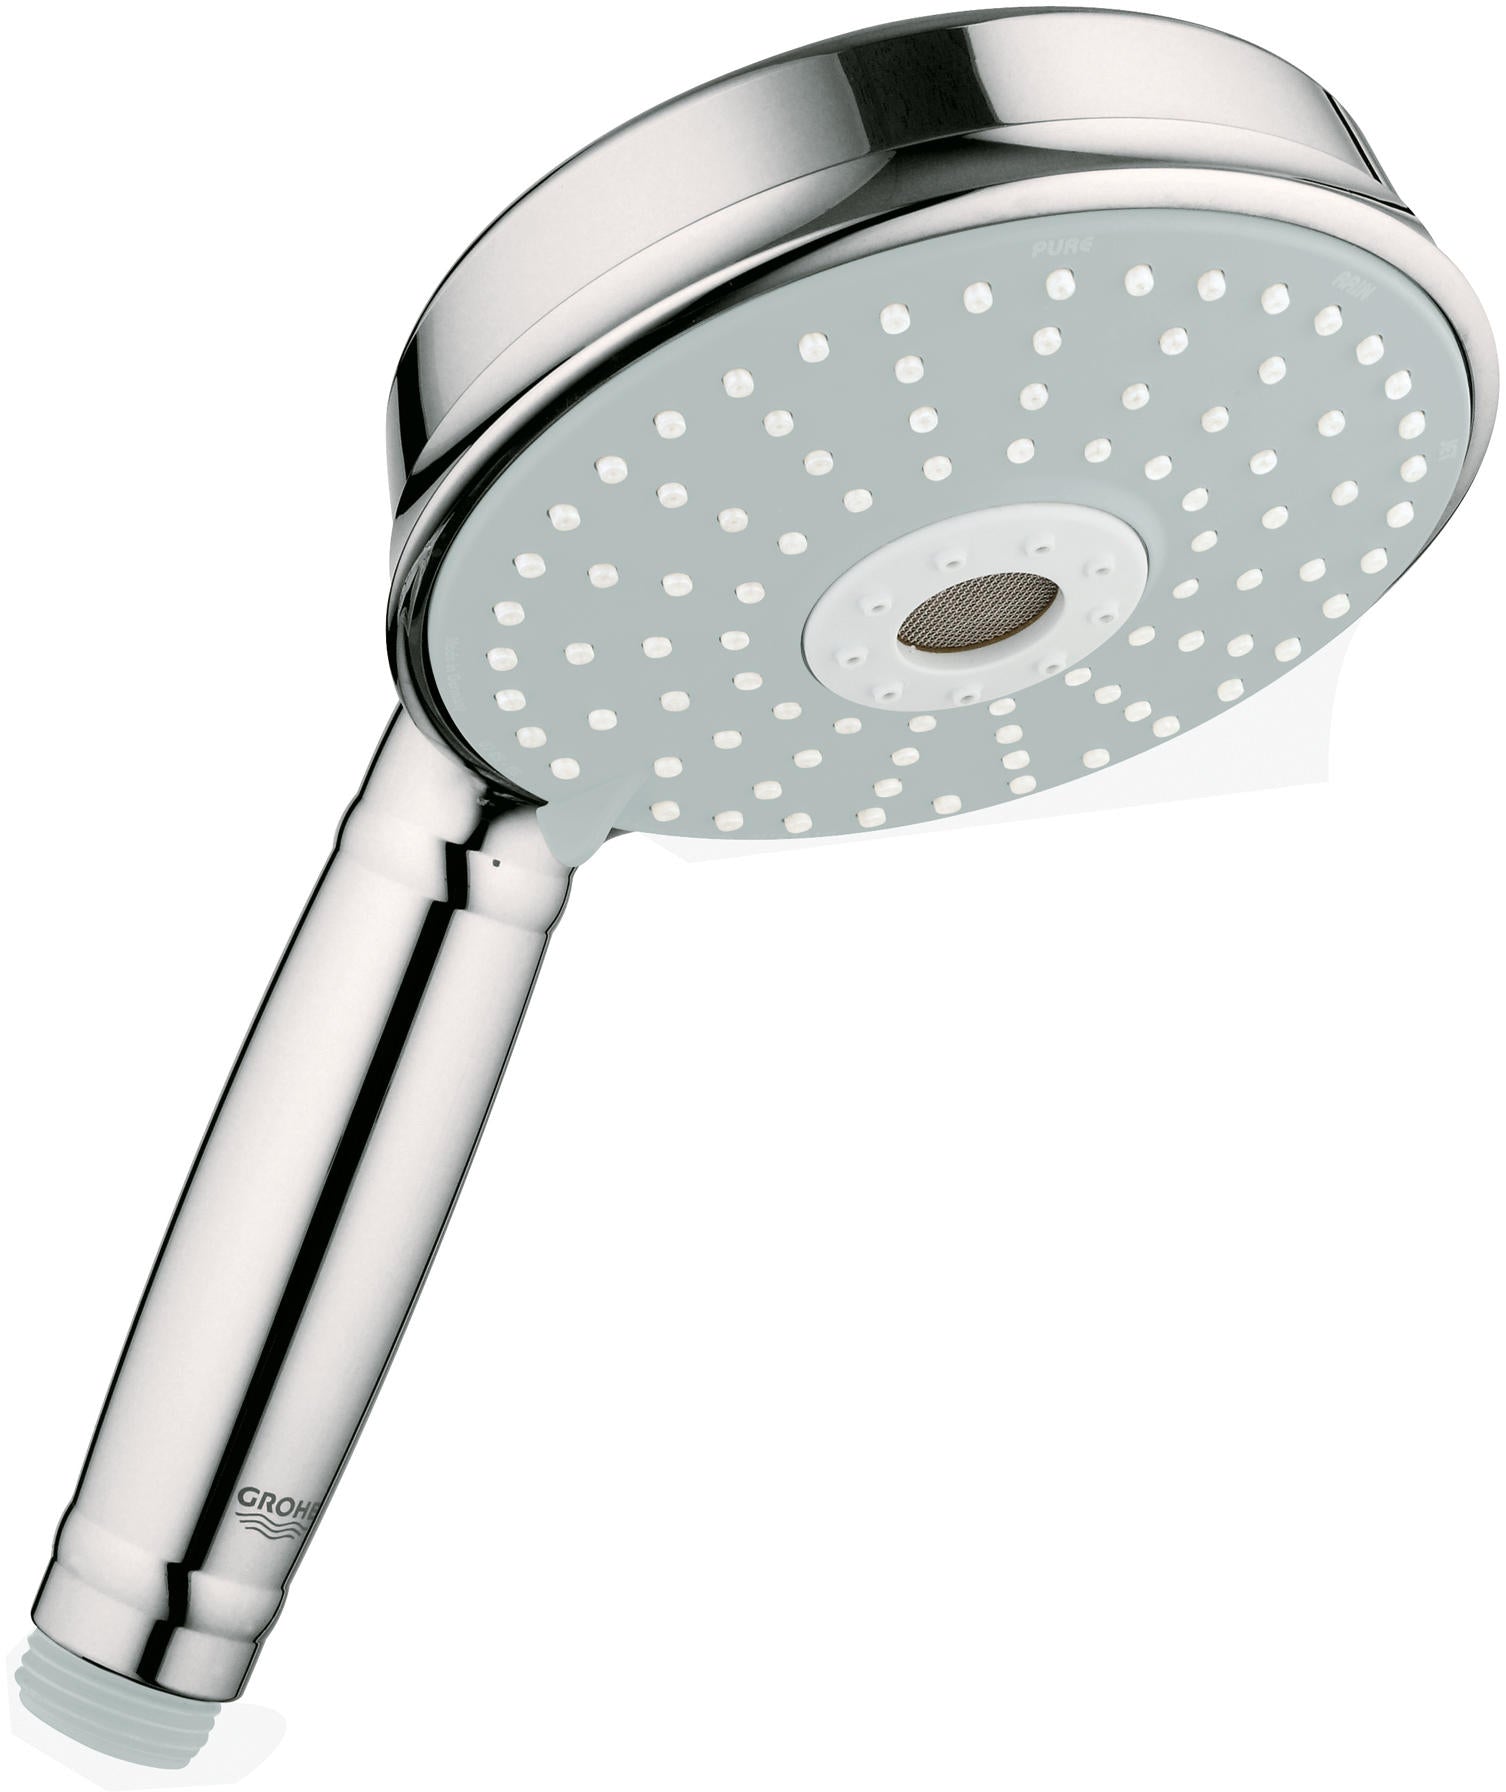 Grohe 27129 Rainshower Rustic Multi-Function Handshower Three Spray with Speed Clean Technology